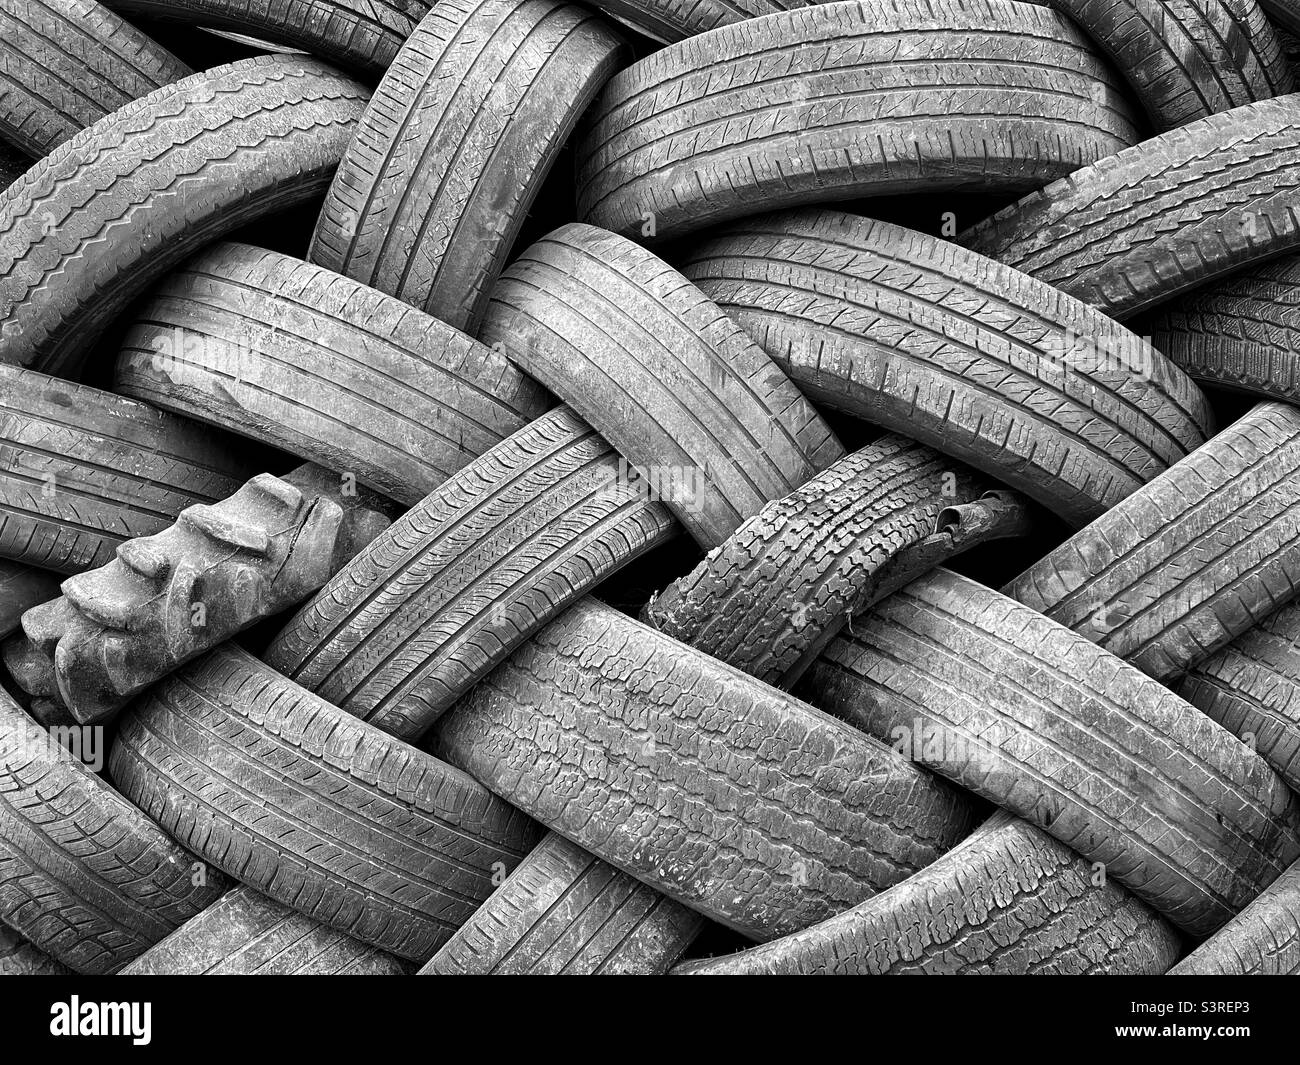 Pile of old tires Stock Photo